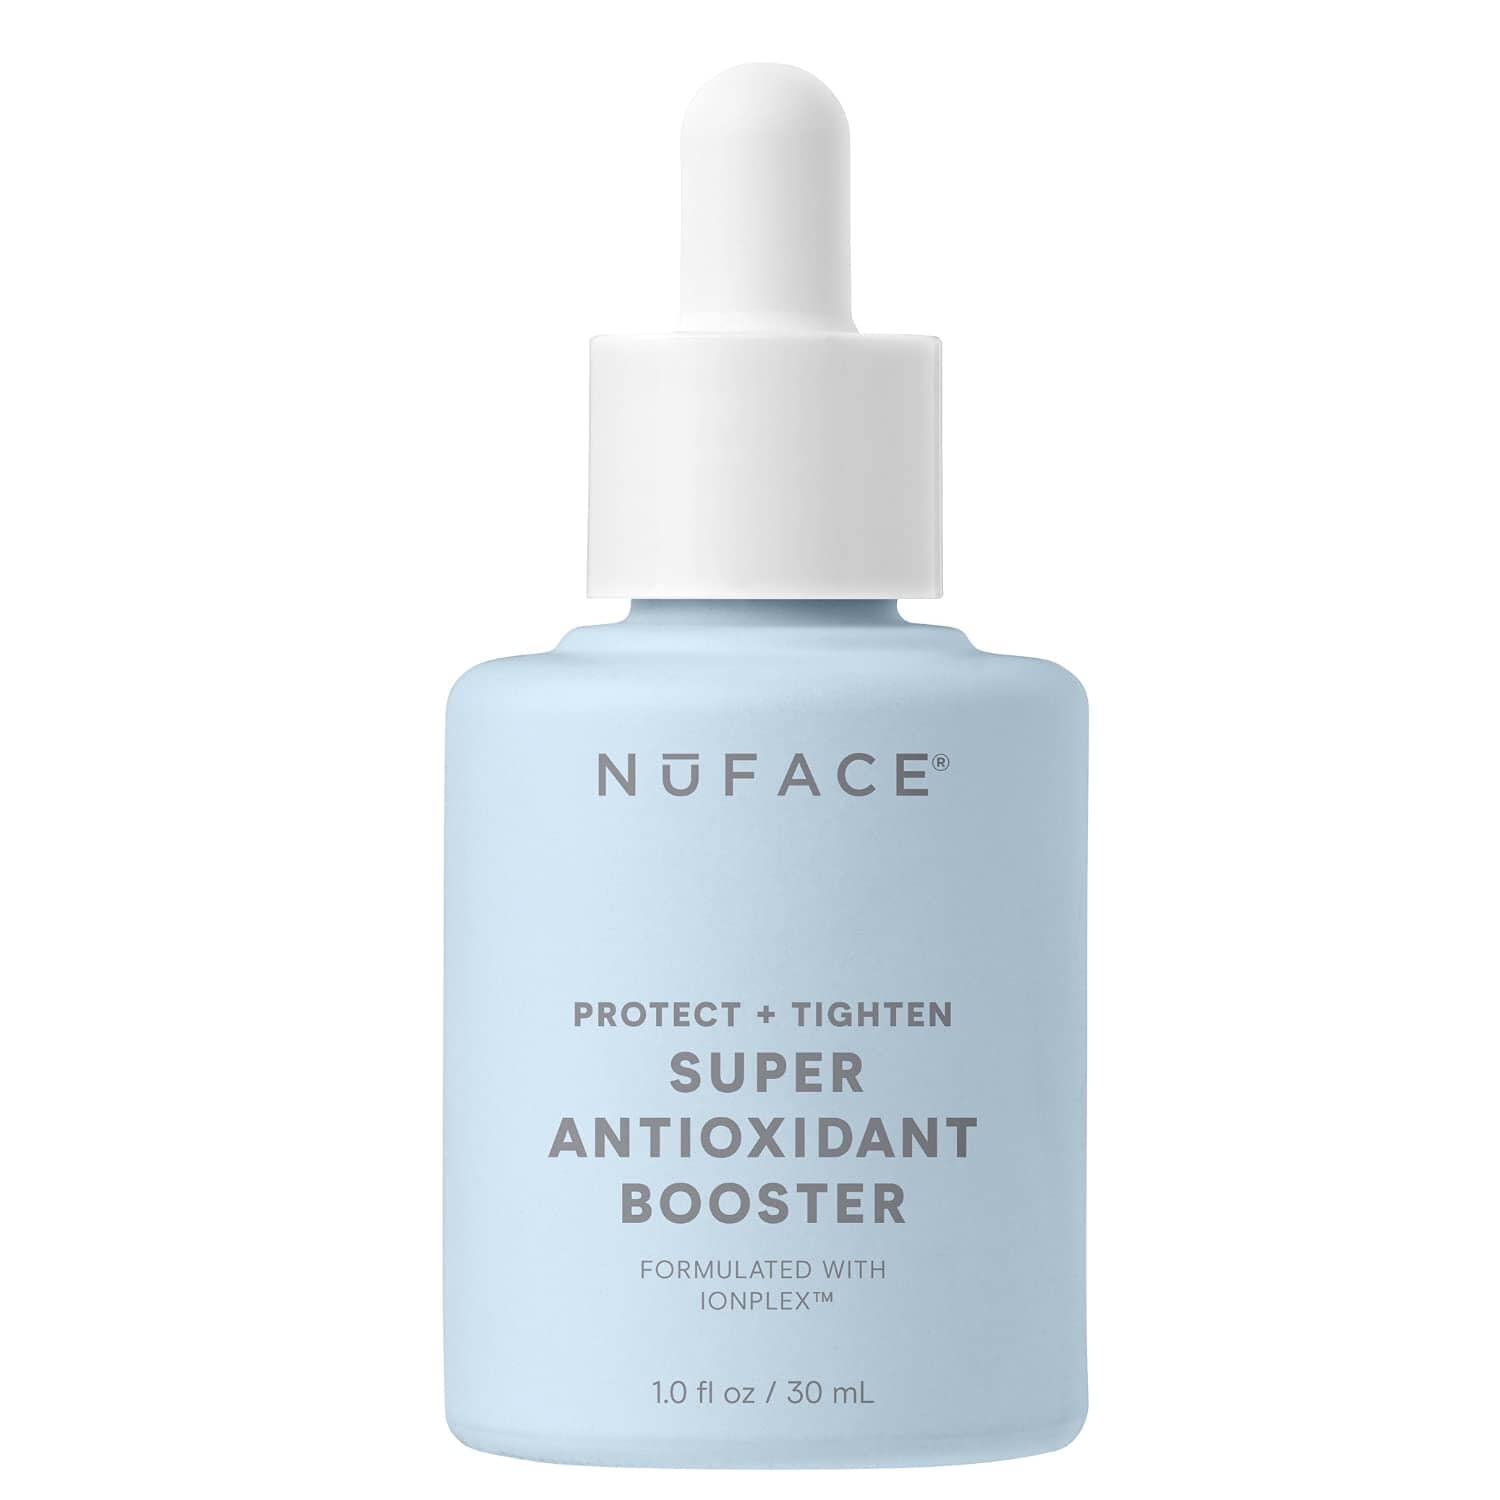 NuFACE Protect + Tighten Super Antioxidant Booster NuFACE 1.0 fl oz Shop at Exclusive Beauty Club